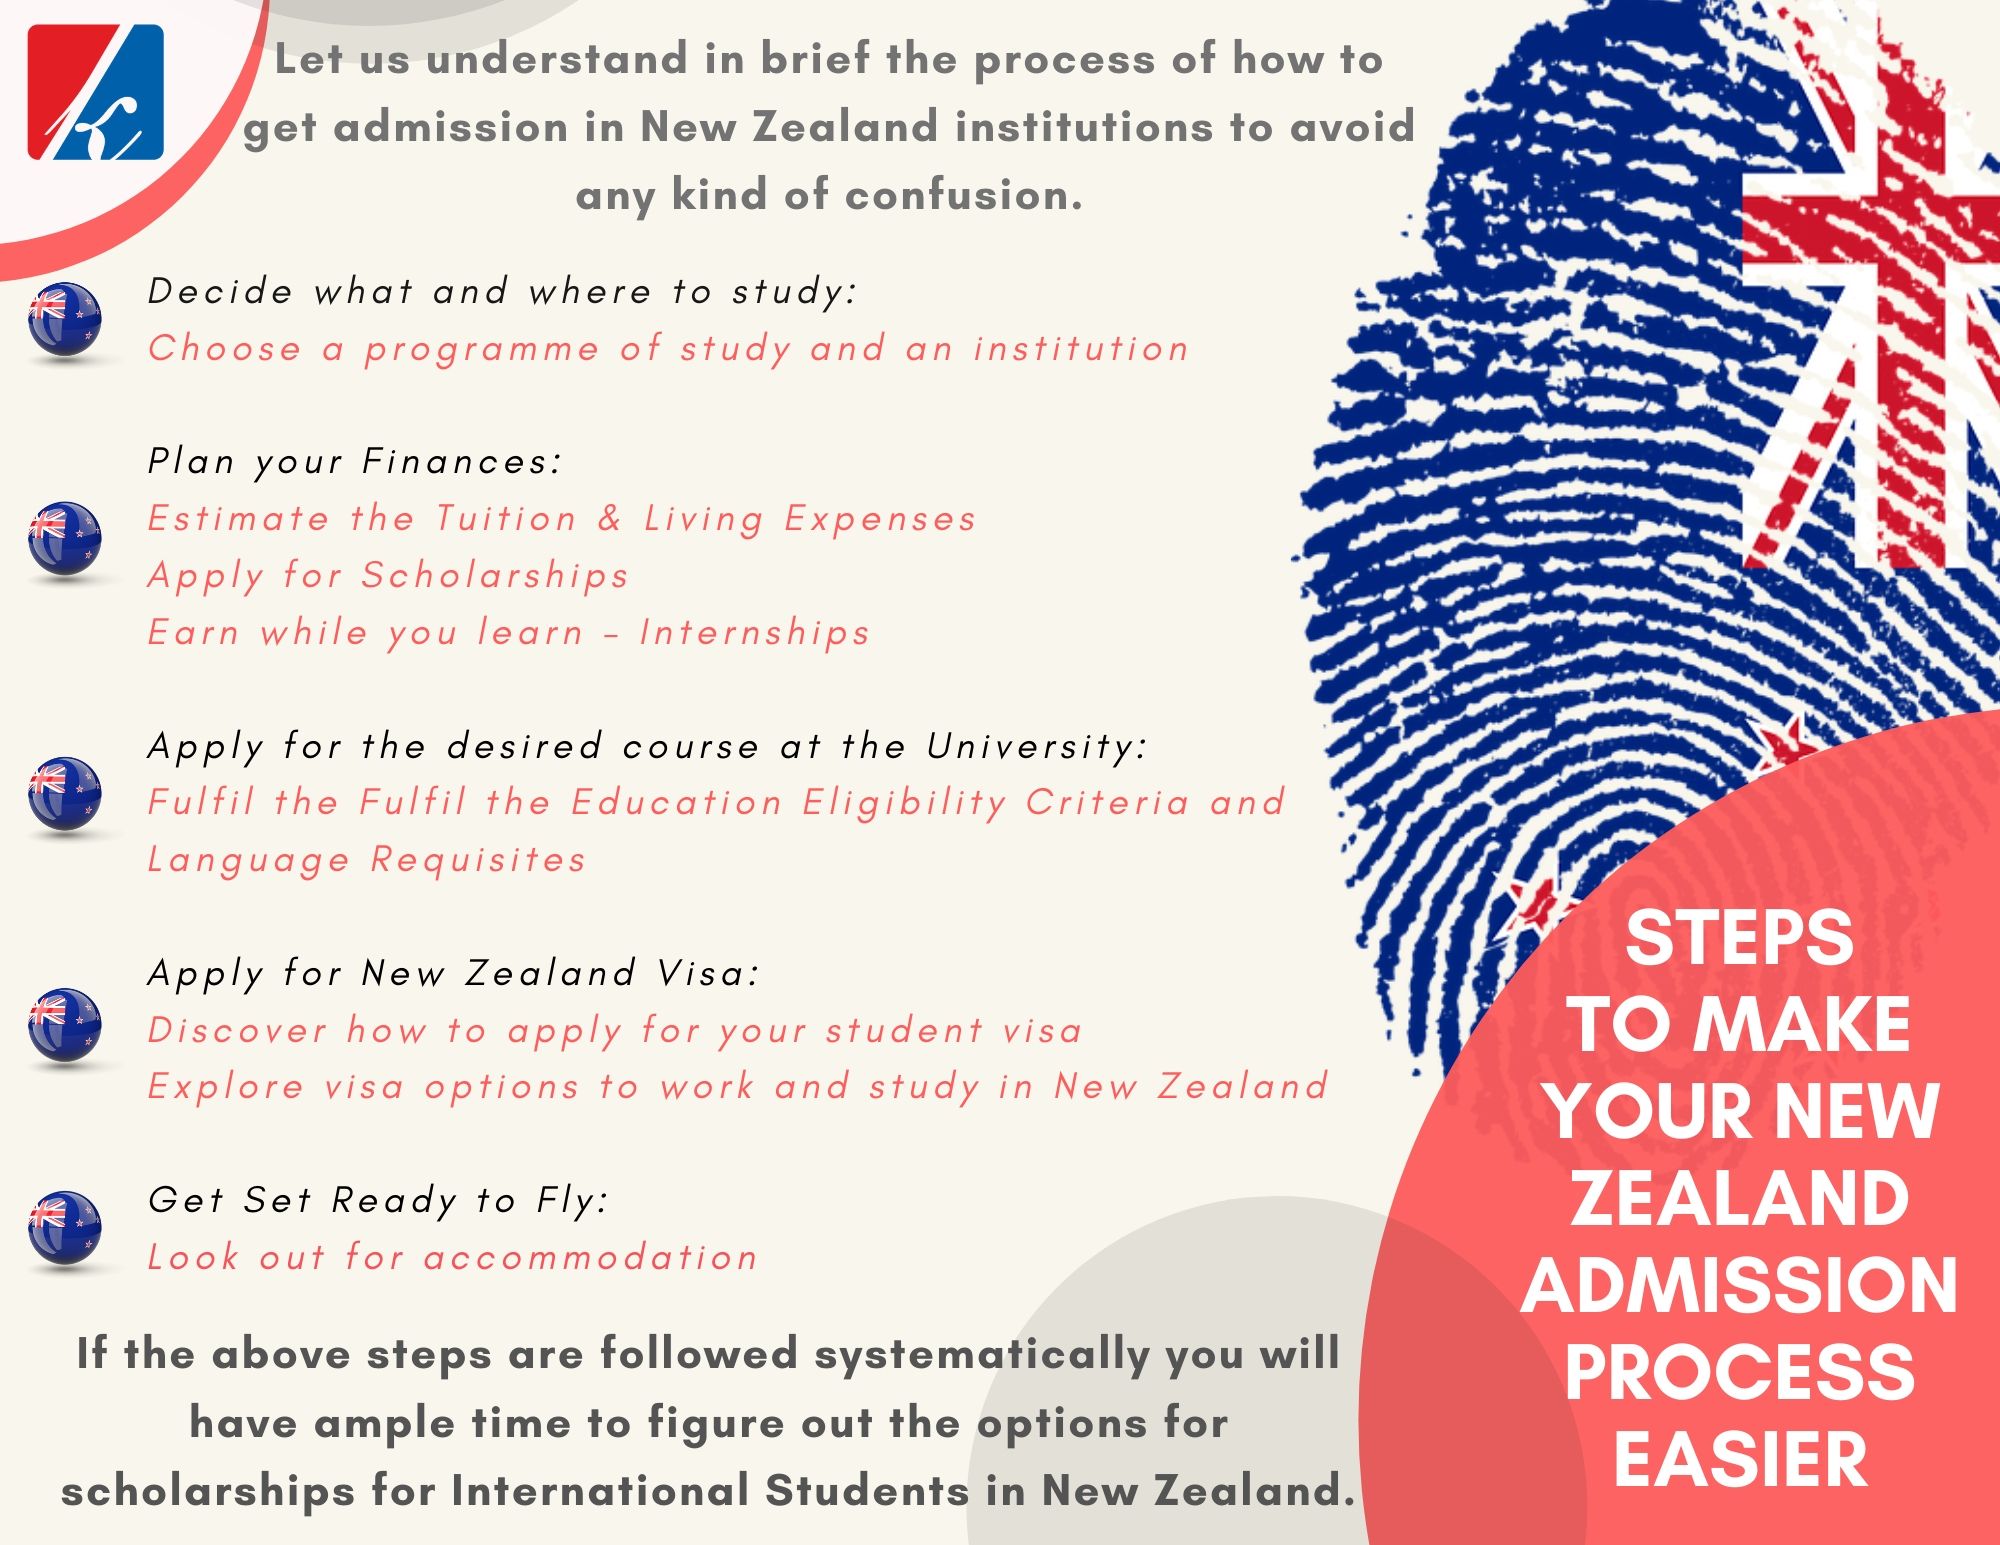 phd admission requirements in new zealand